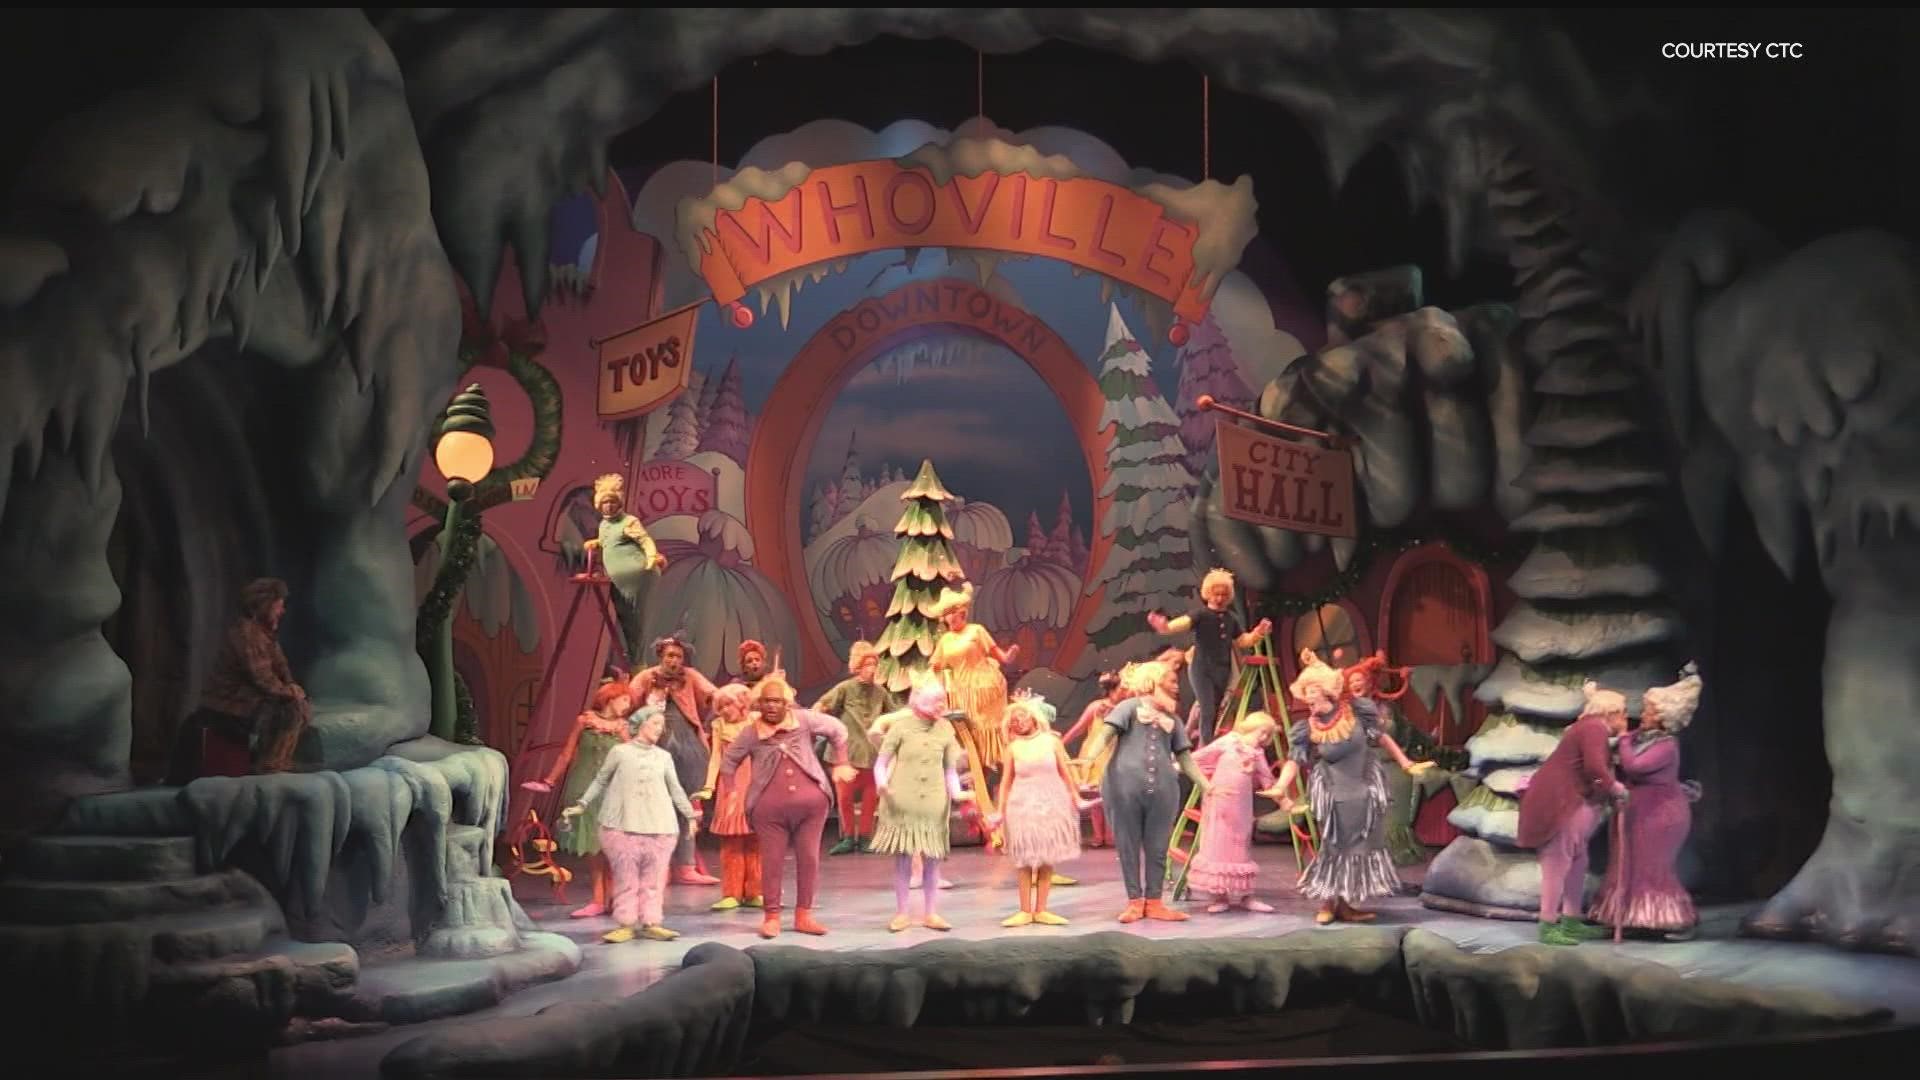 Performances of the Christmas classic started on Nov. 8 and continue through Jan. 8.